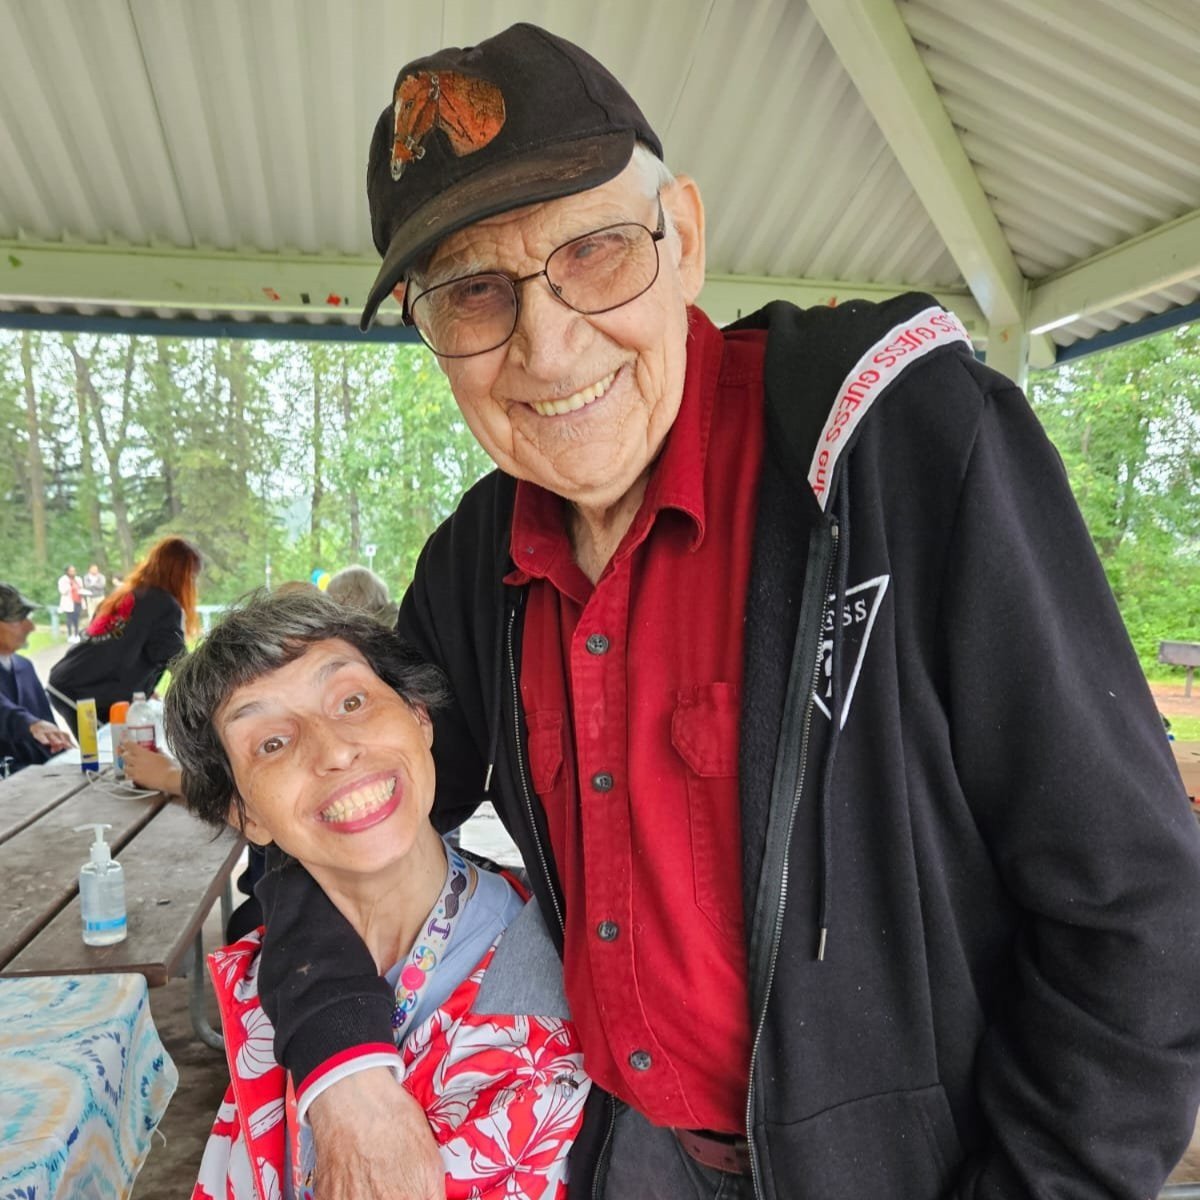  A man and women with their arms around each other are smiling. The women is seated at a picnic table. The man is wearing a ball cap and glasses.  